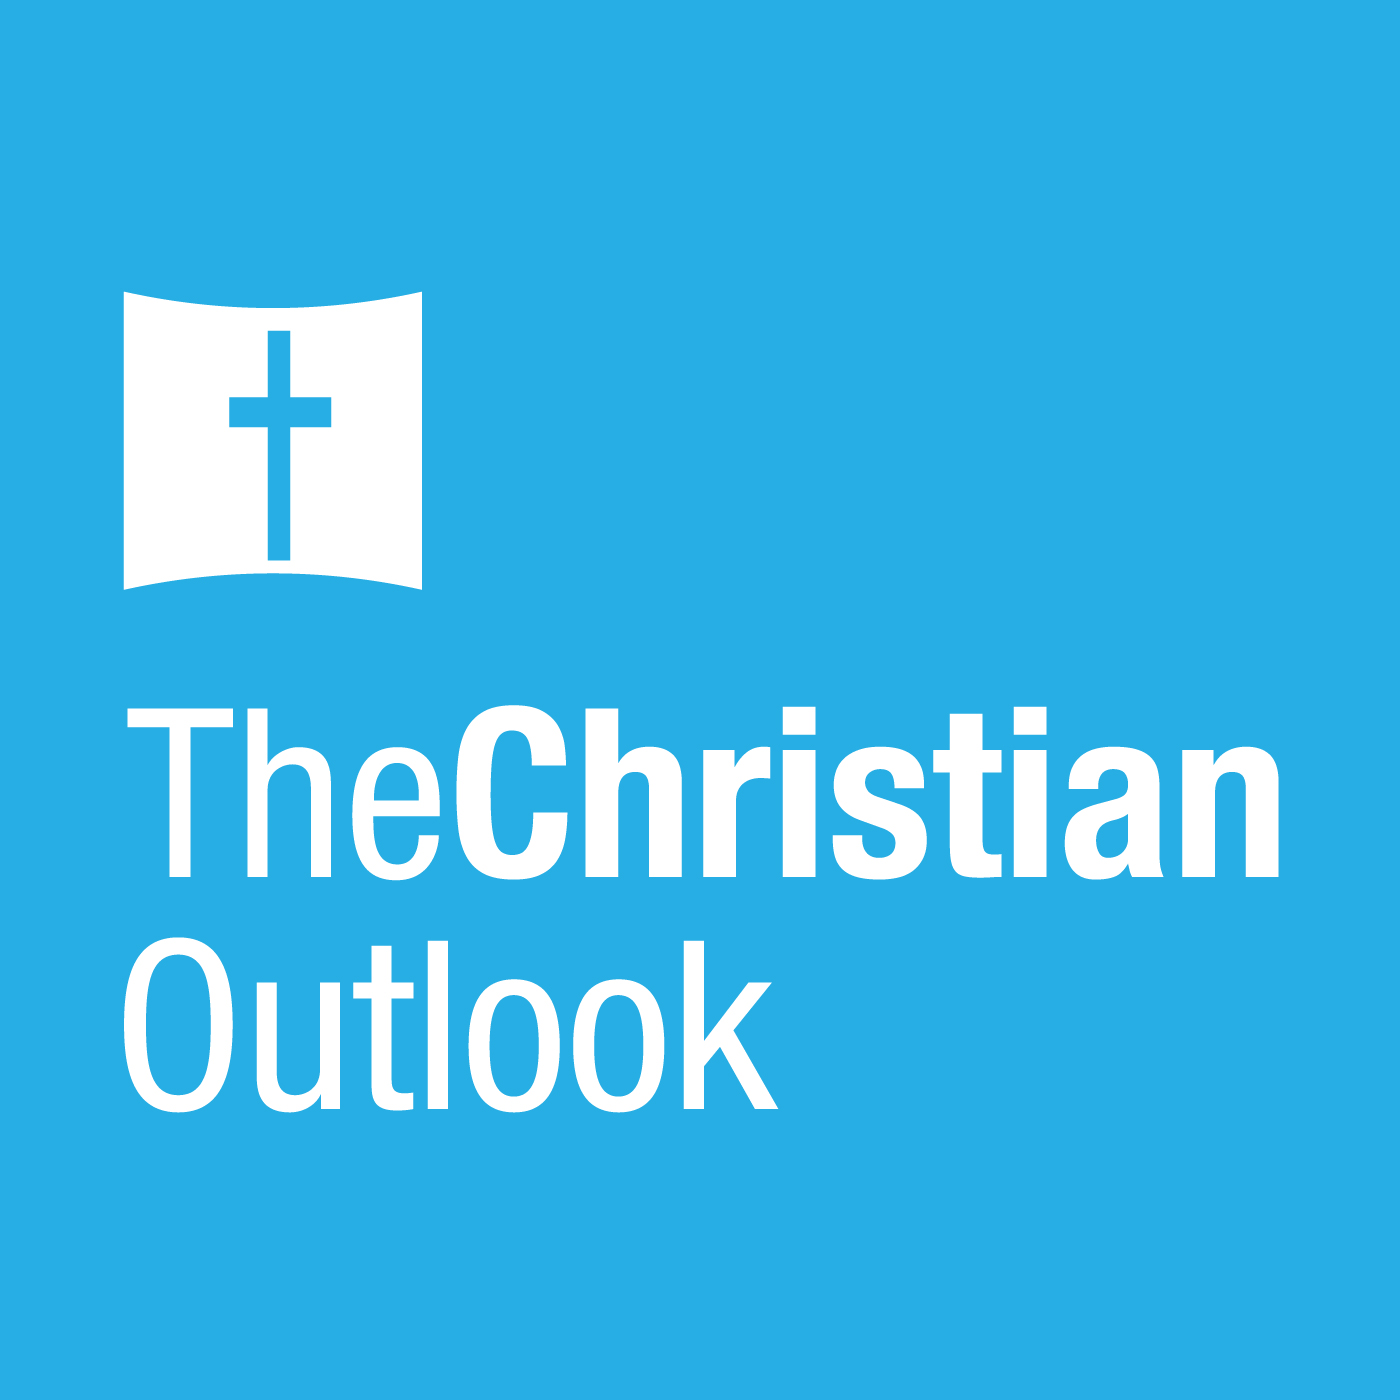 Christian Outlook 6/27/15: A Muslim Convert to Christianity Escapes Her Honor Killing